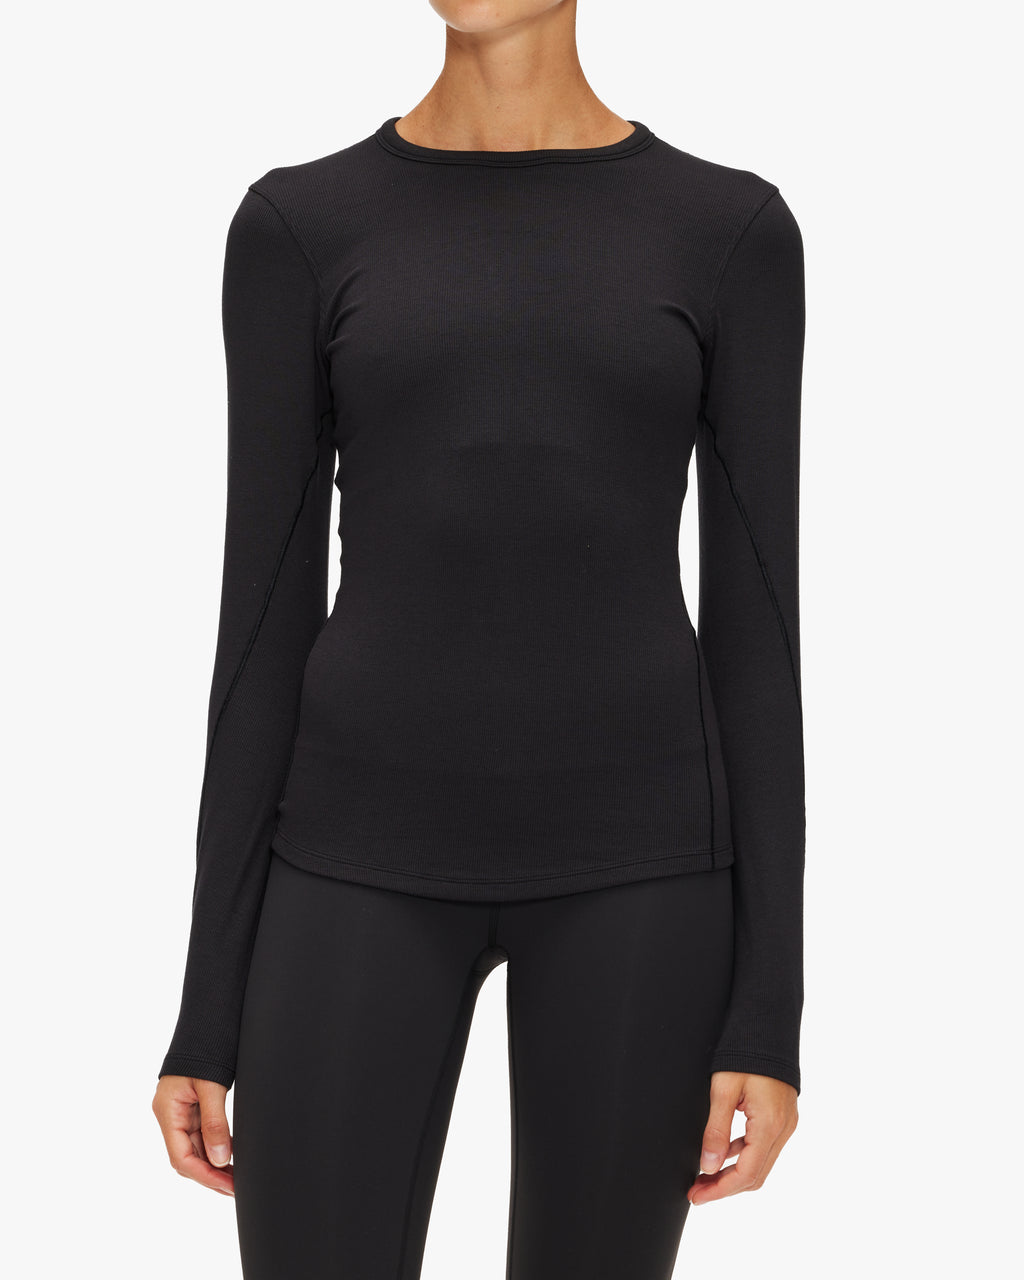 Lululemon Hold Tight Long Sleeve – The Shop at Equinox